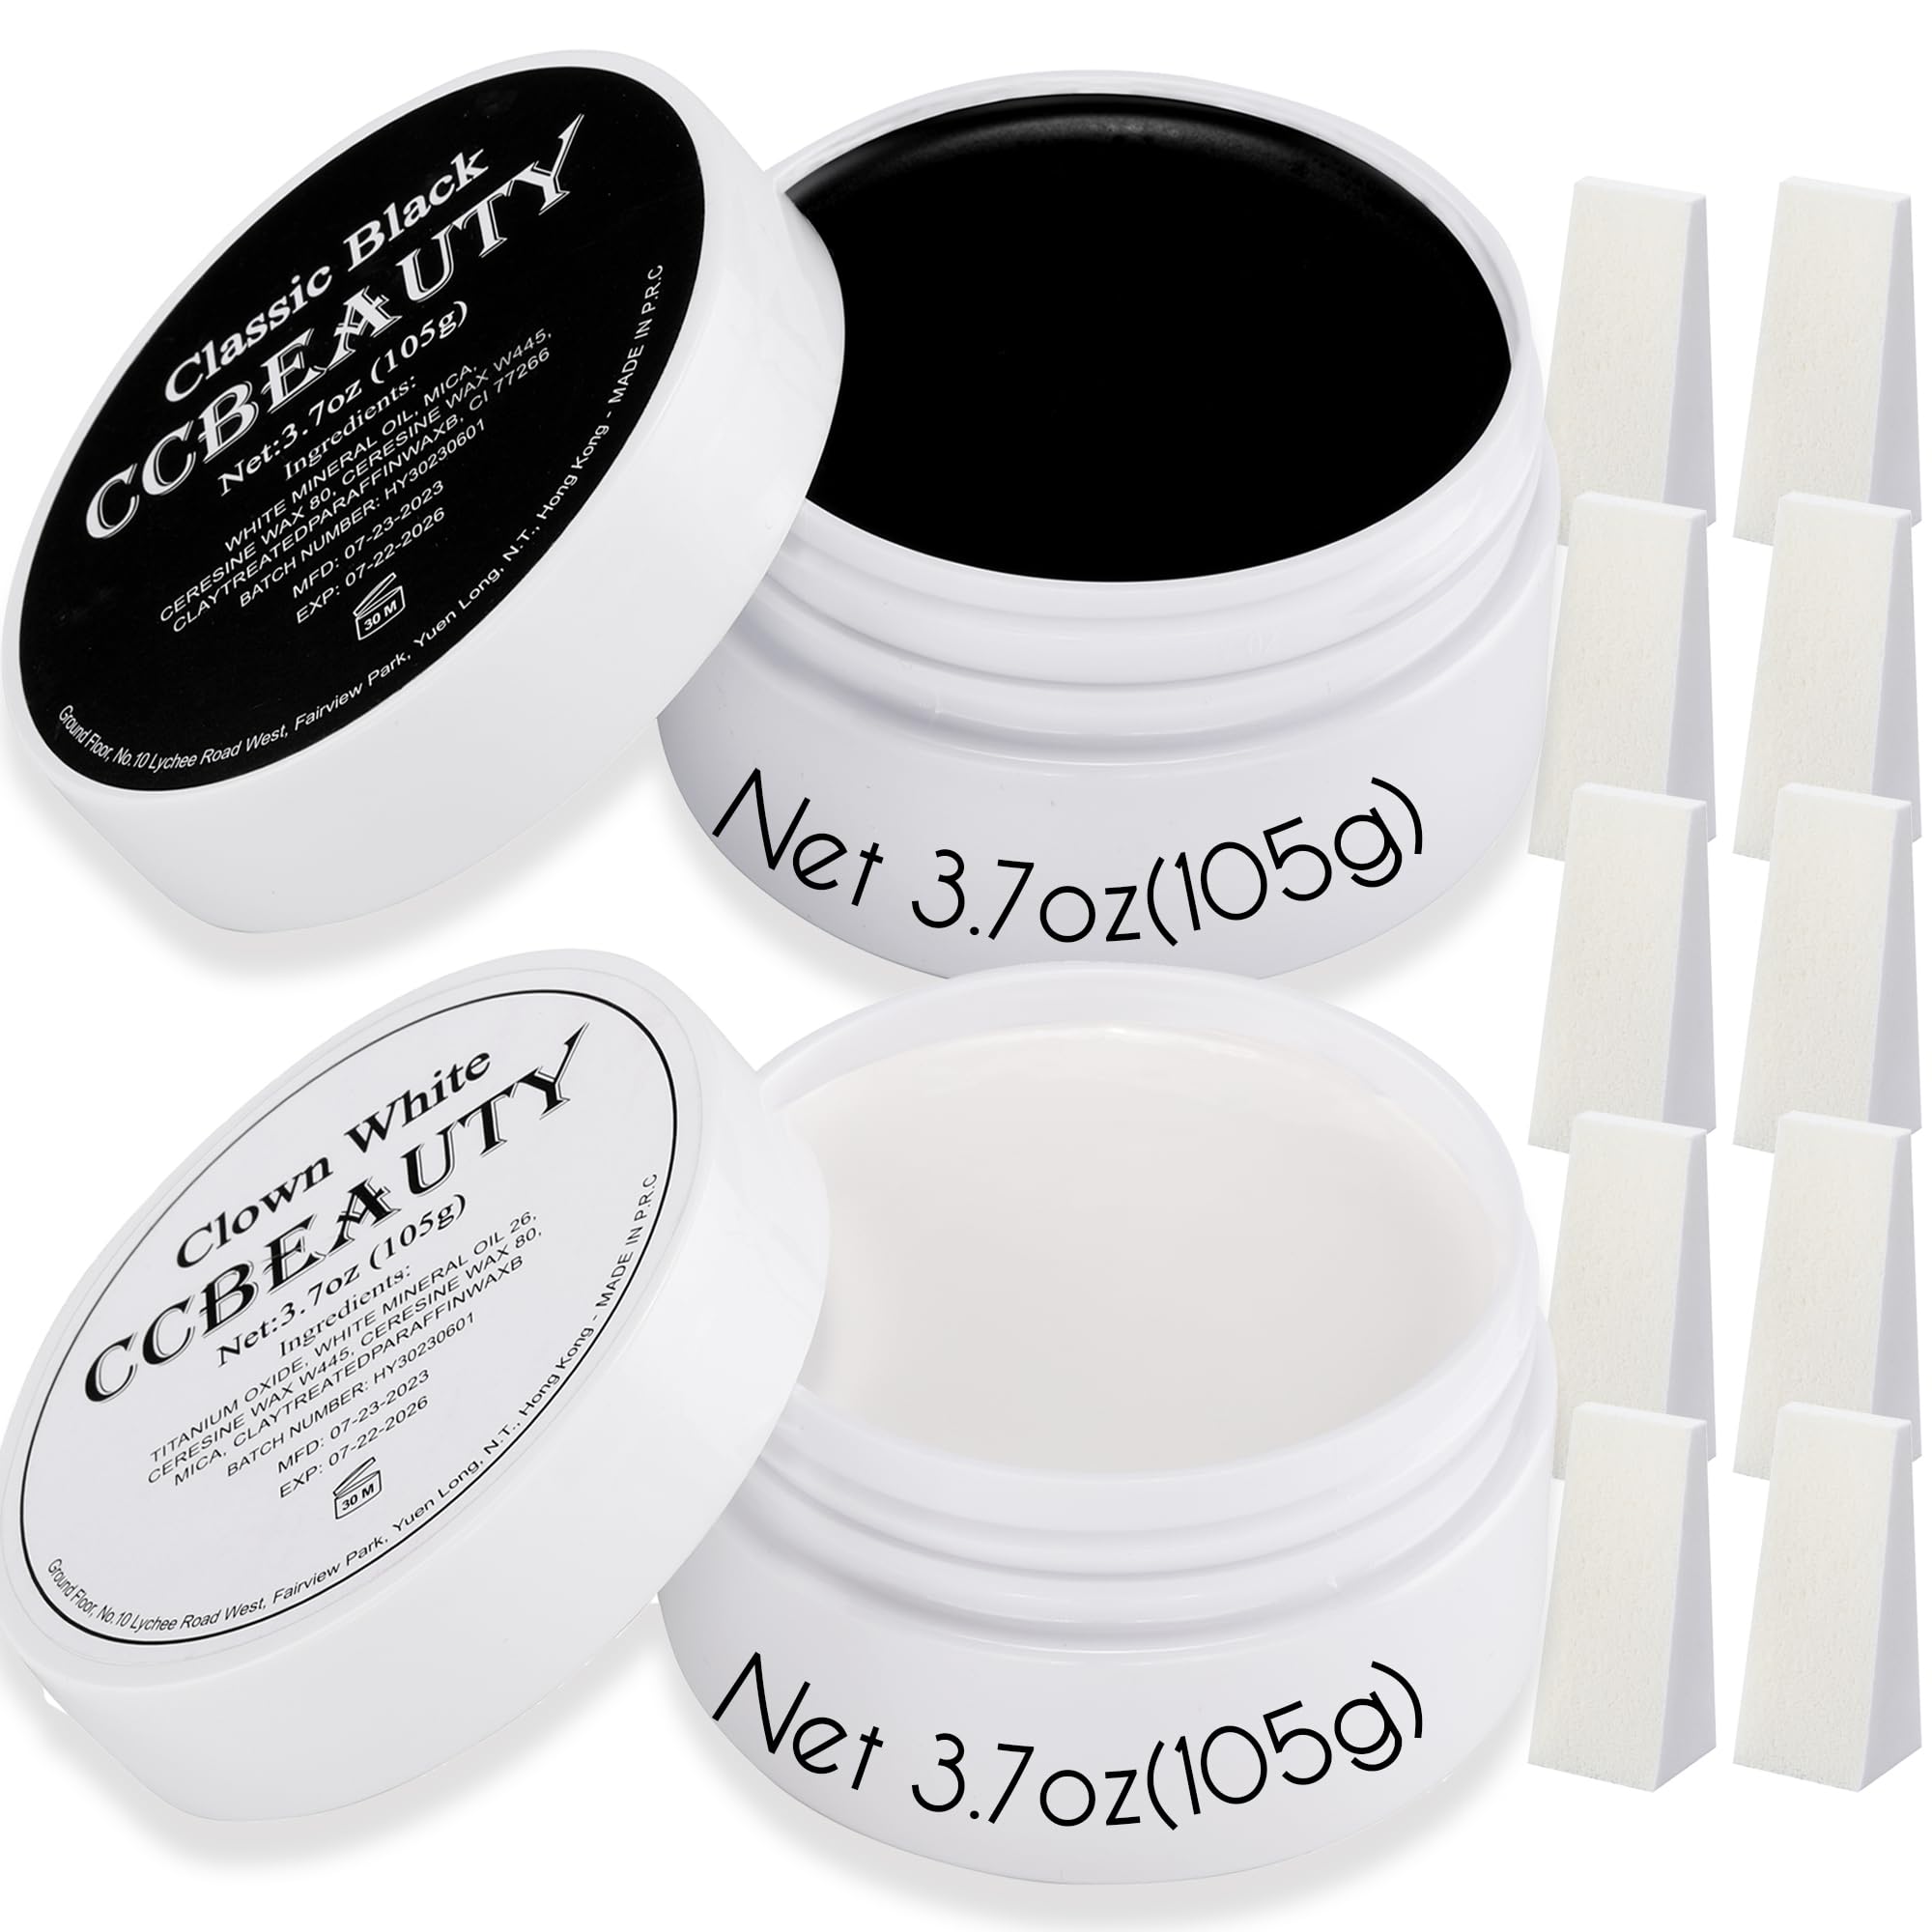 CCbeauty 7.4oz Halloween Clown Makeup, Large Black White Face Body Paint Set with 10 Sponges Non Toxic Dress Up Face Painting Kit for Adult Mime Skeleton Skull Costume Cosplay Makeup